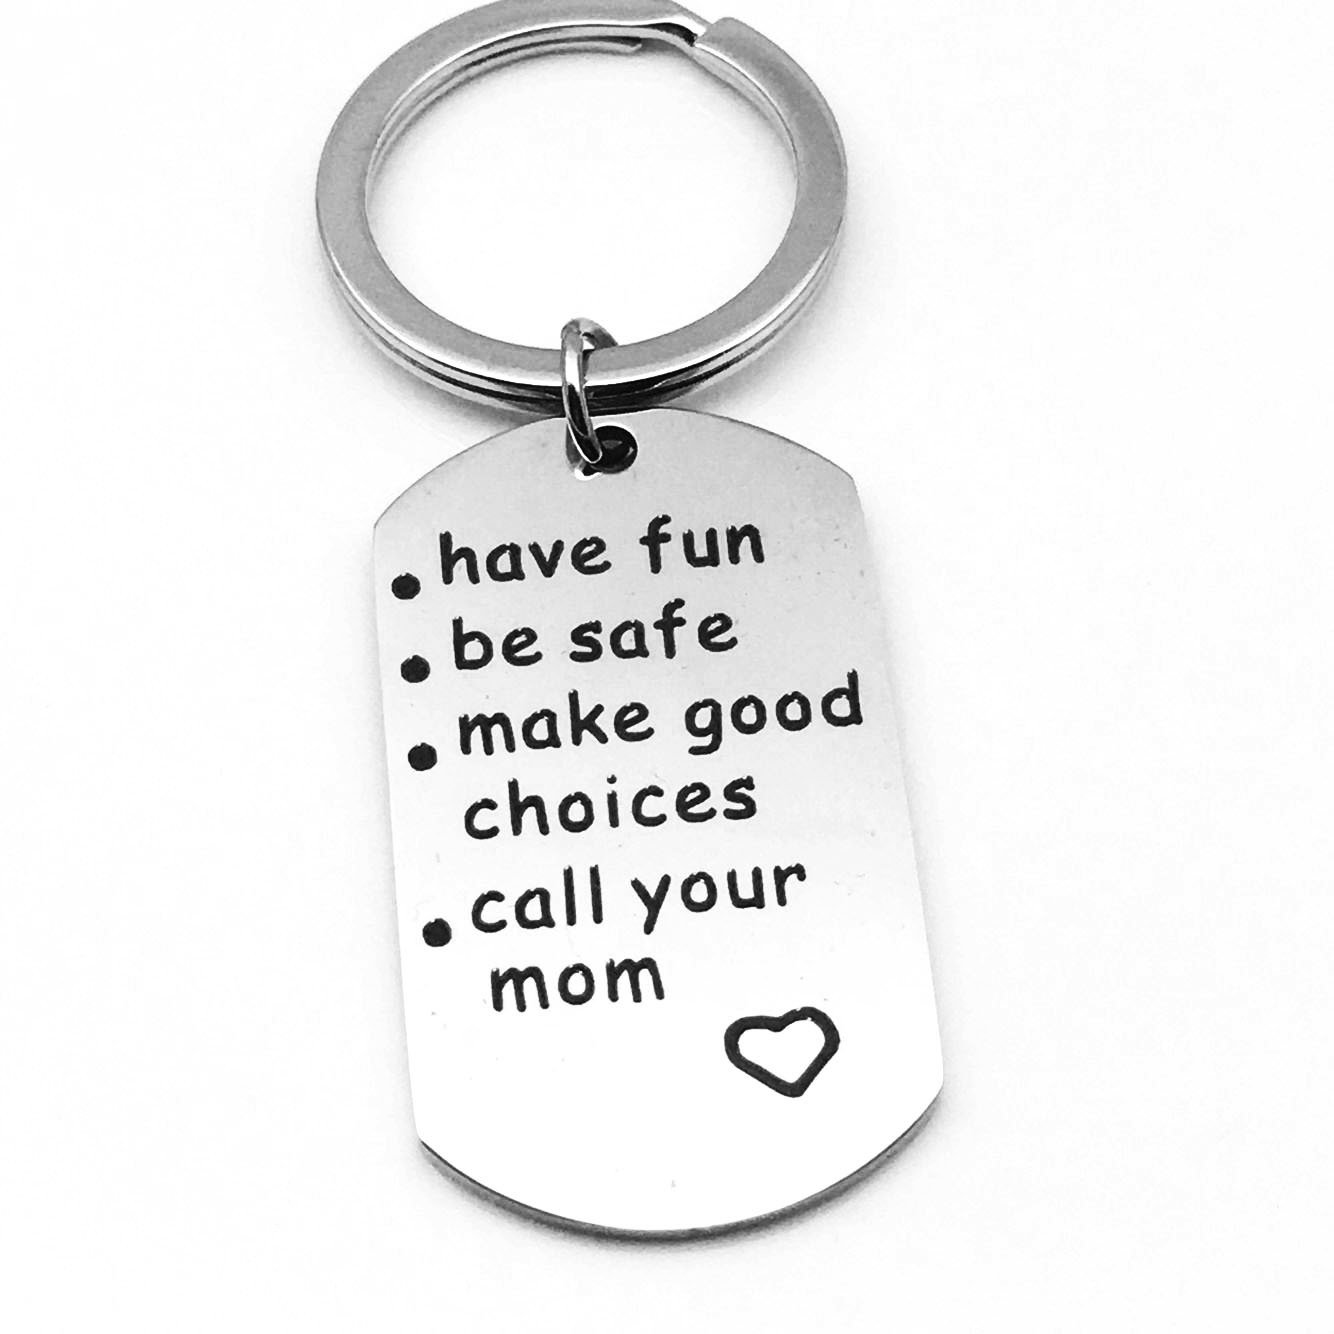 Last Day 75% OFF - 🔥Have Fun, Be Safe, Make Good Choices and Call Your Grandma/Grandpa Keychain